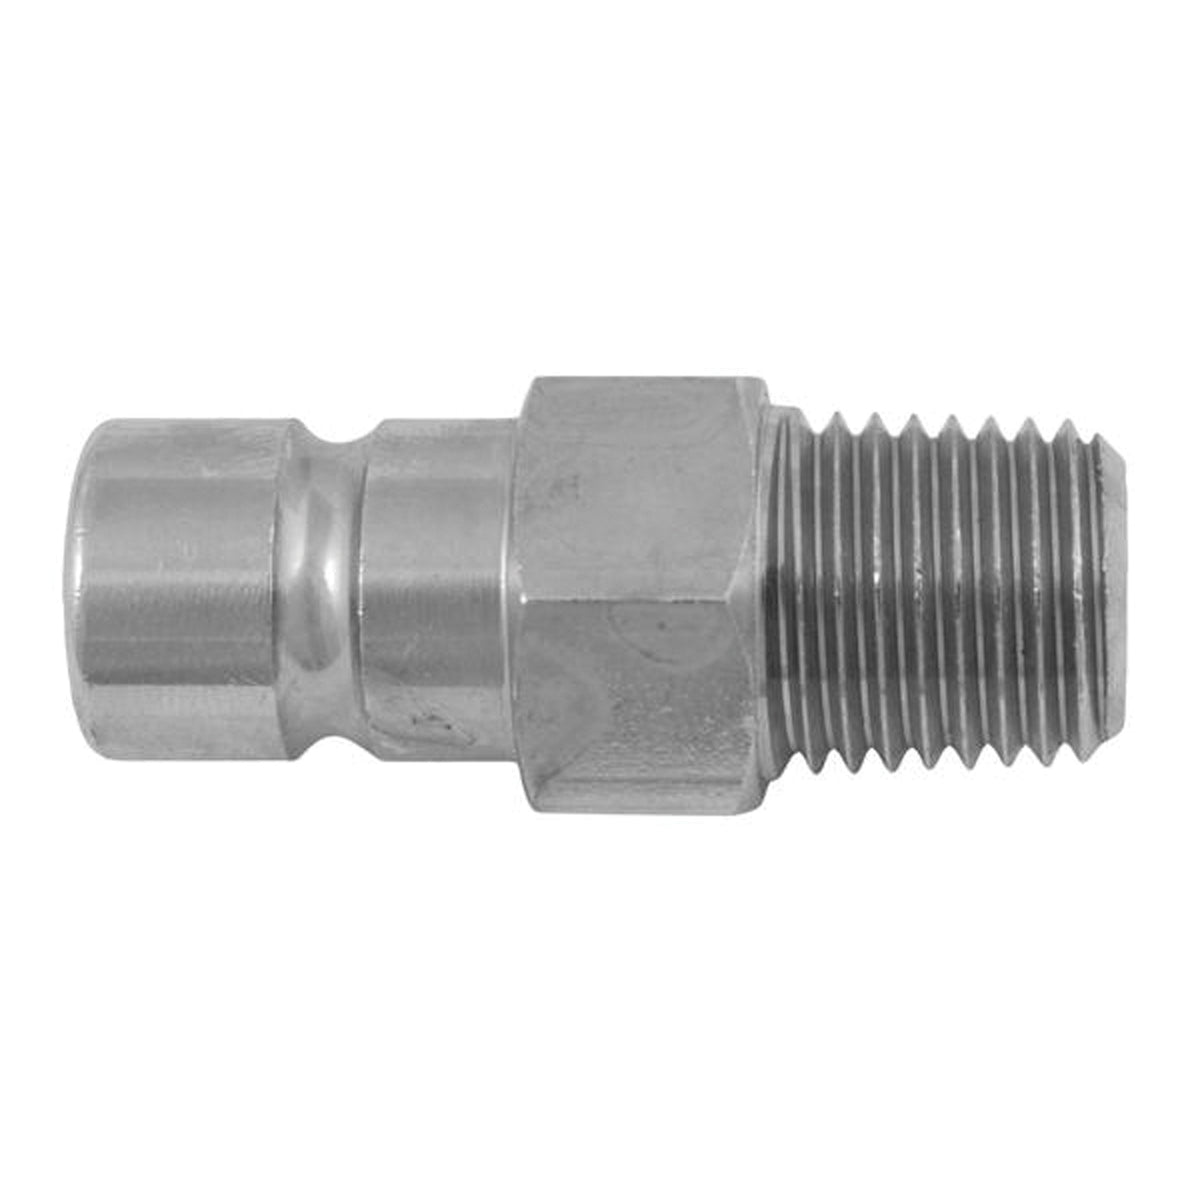 Attwood 8901-6 Honda Male Tank Fitting (1991+) for Over 90 HP with 1/4 in. NPT